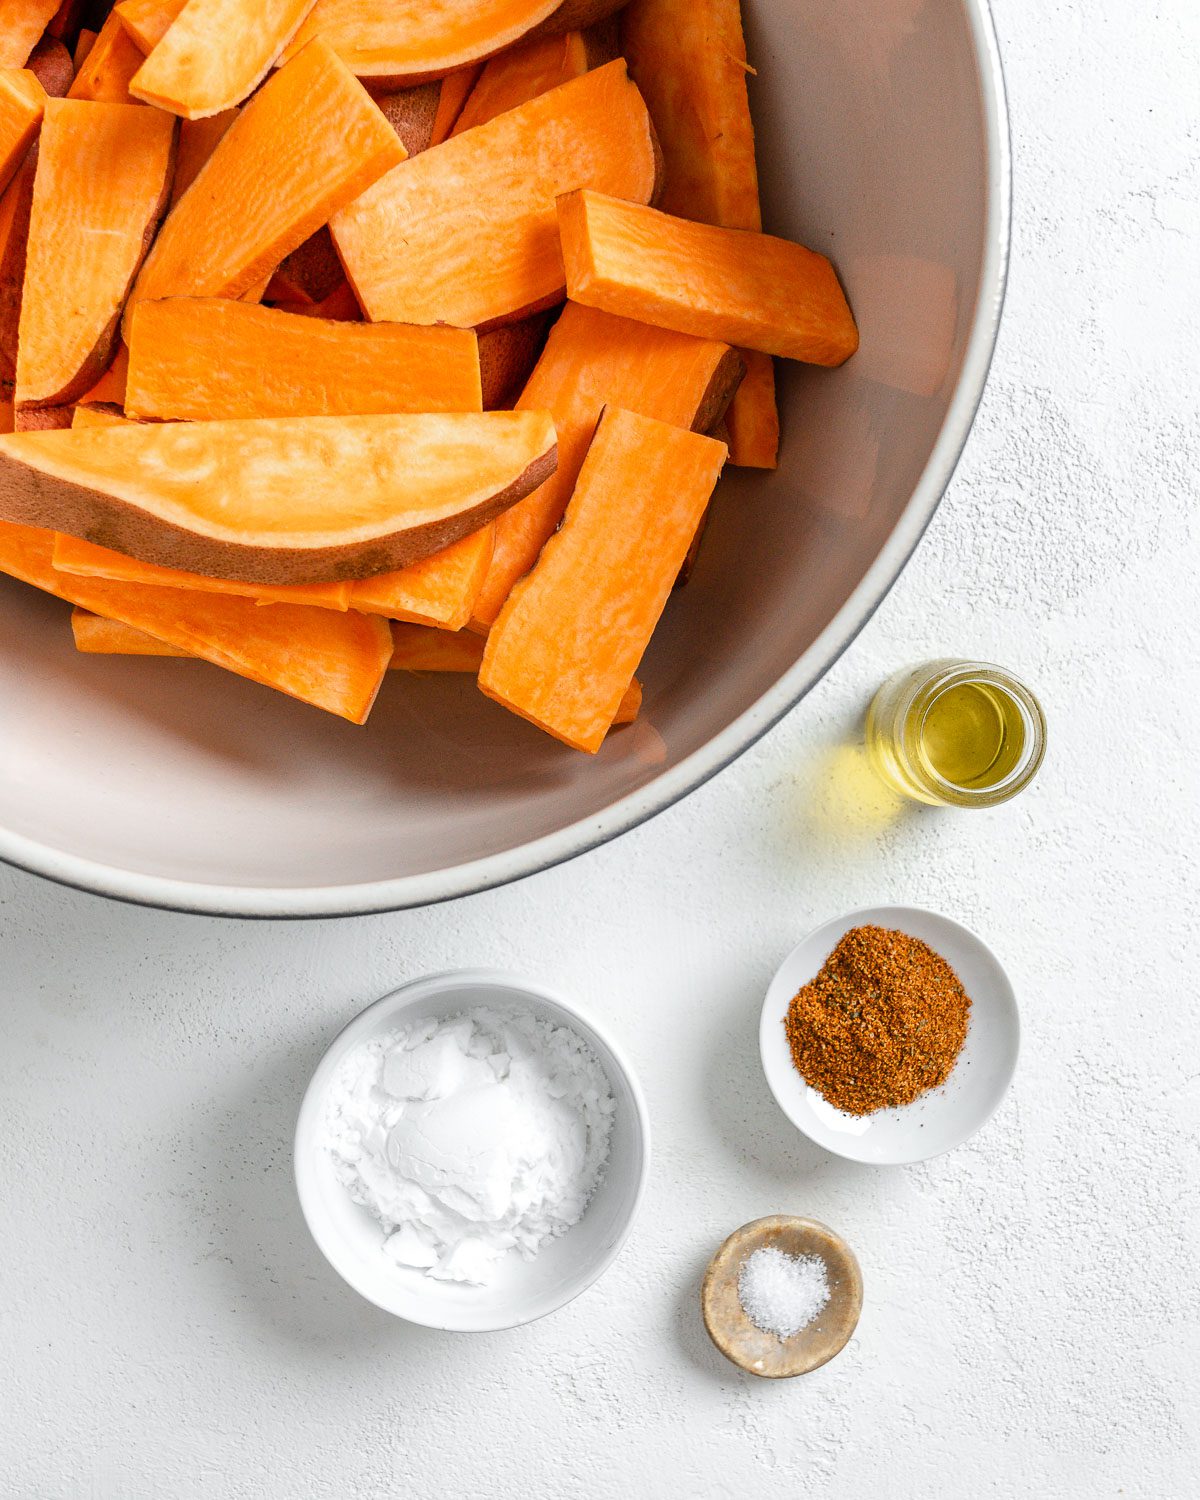 ingredients for sweet potato wedges measured out in individual bowls against a white surface